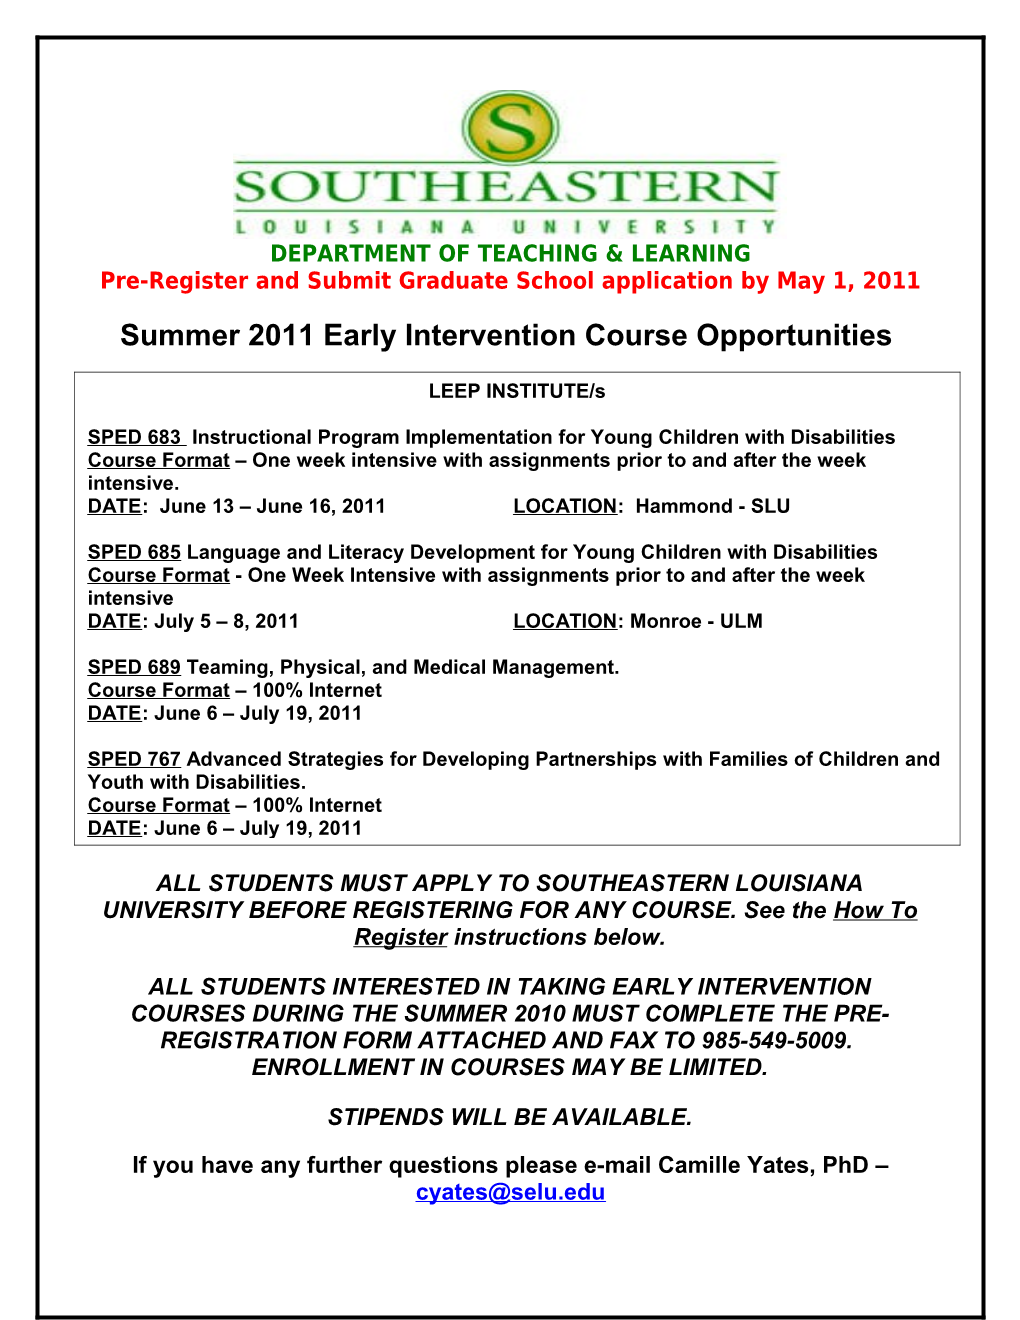 Summer 2011 Early Intervention Course Opportunities